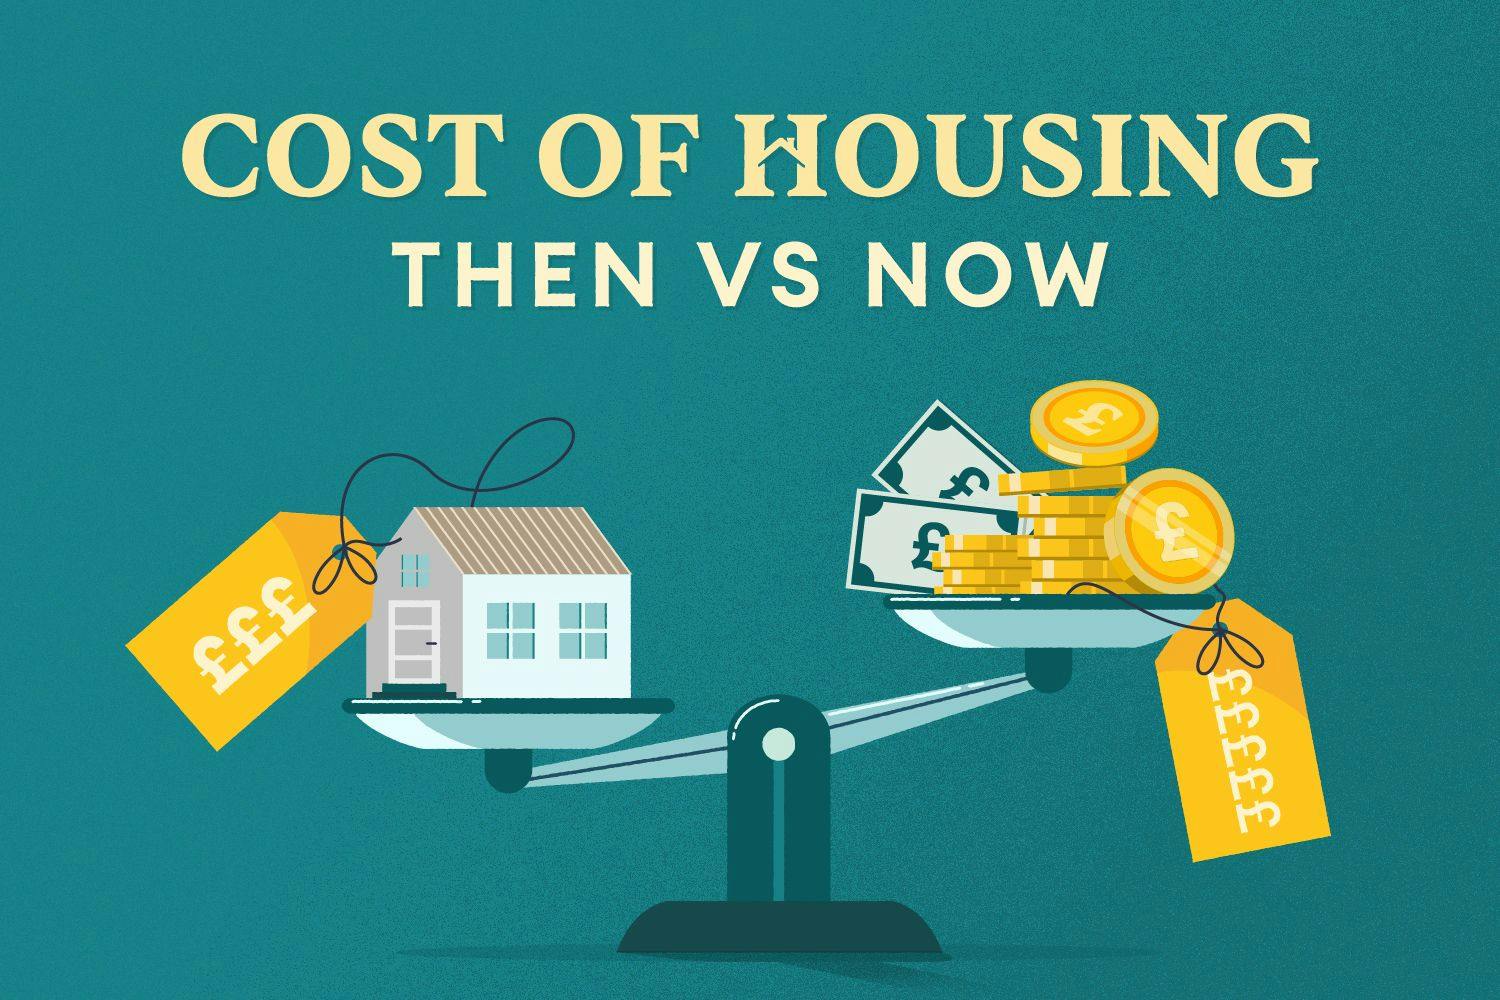 Cost of housing then vs now